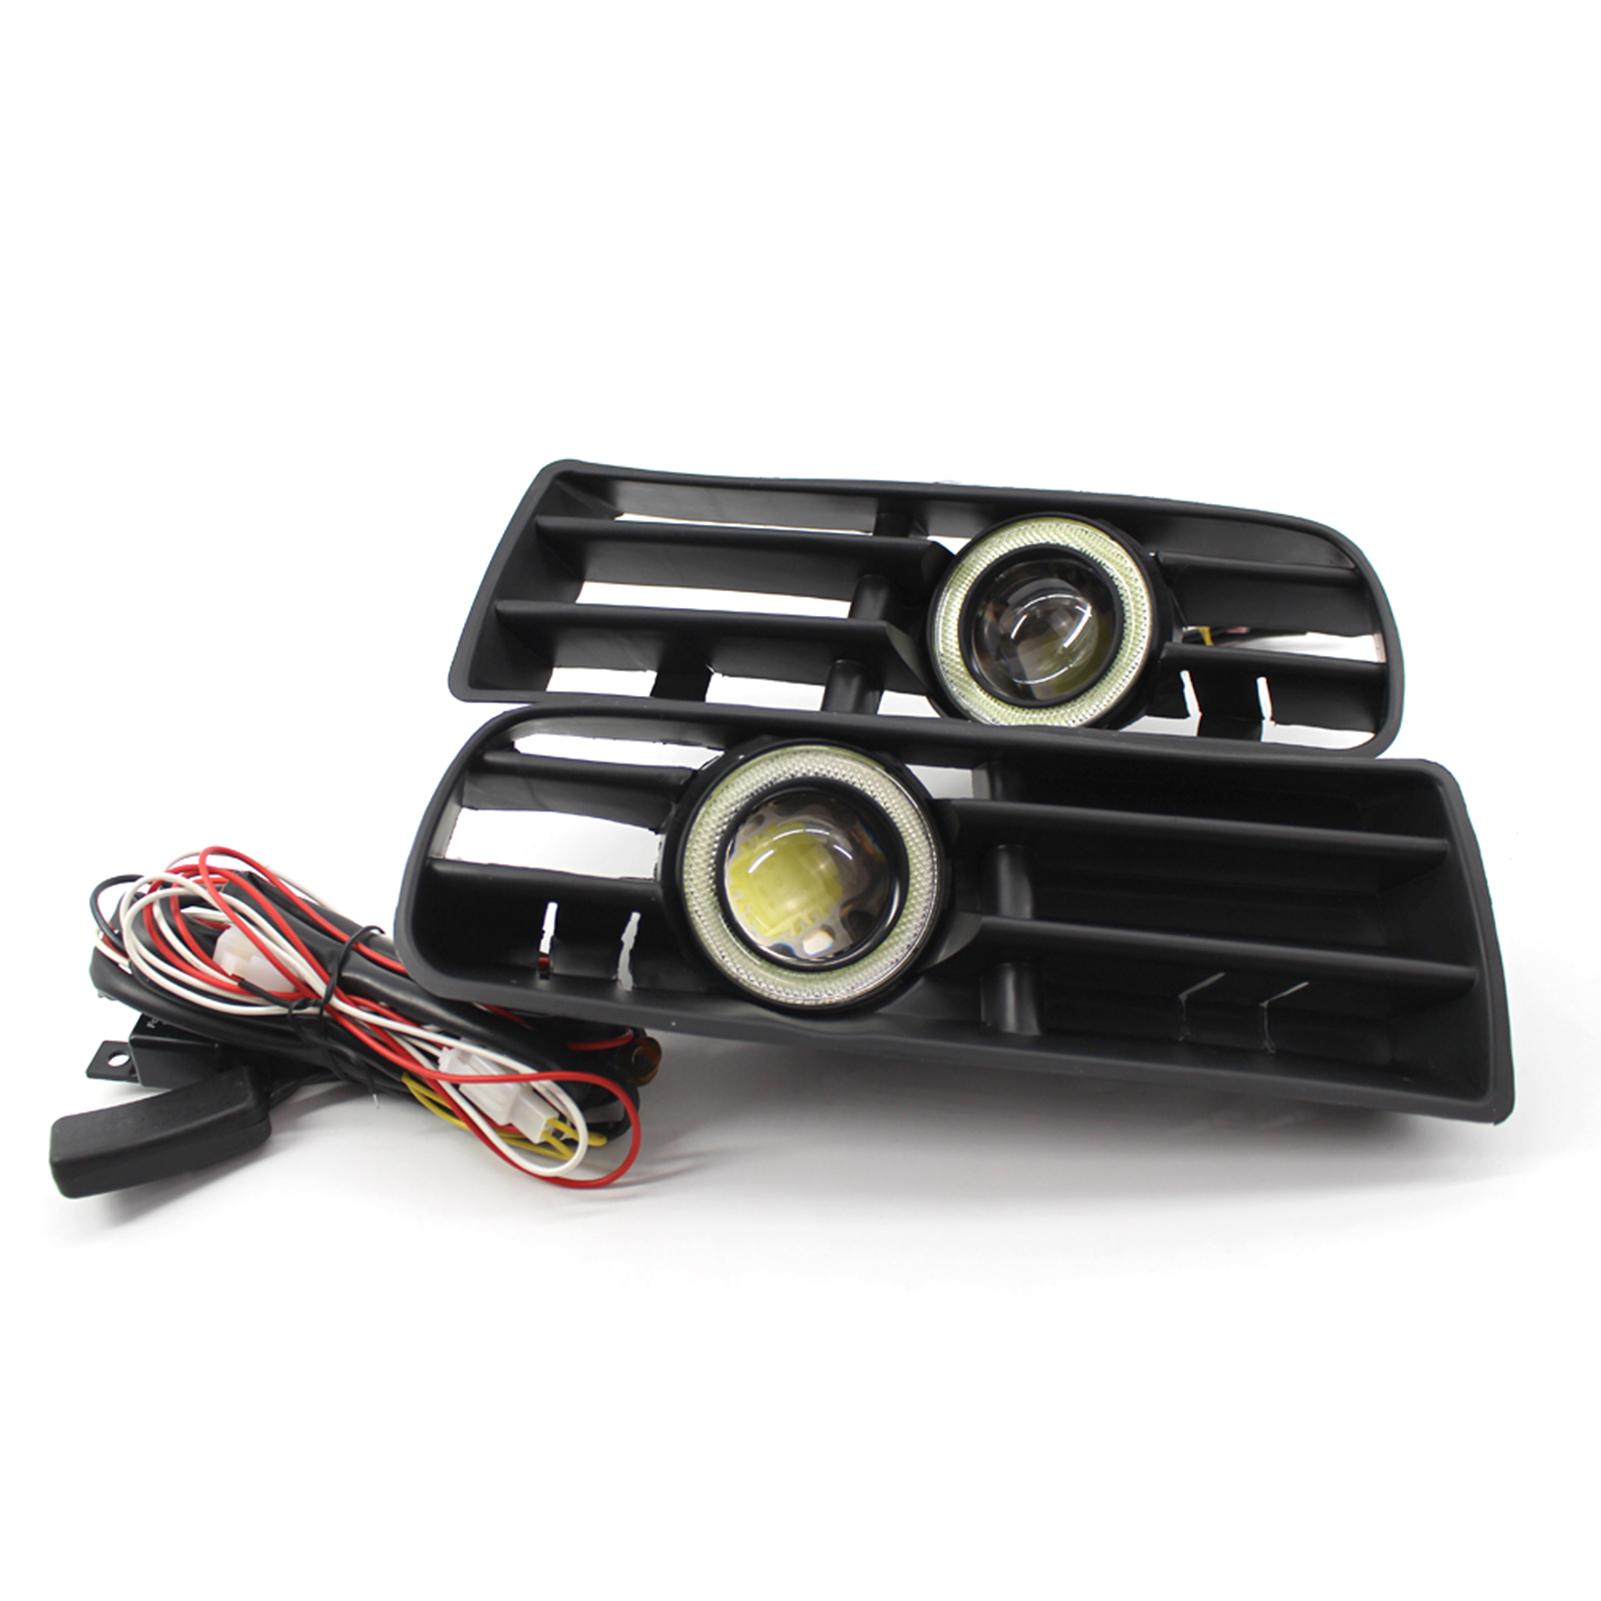 1 Pair Car Auto White Fog Light Front Bumper Grilles Replacement For VW Golf MK4 1998-2004 Angel Eyes Lamp LED Running